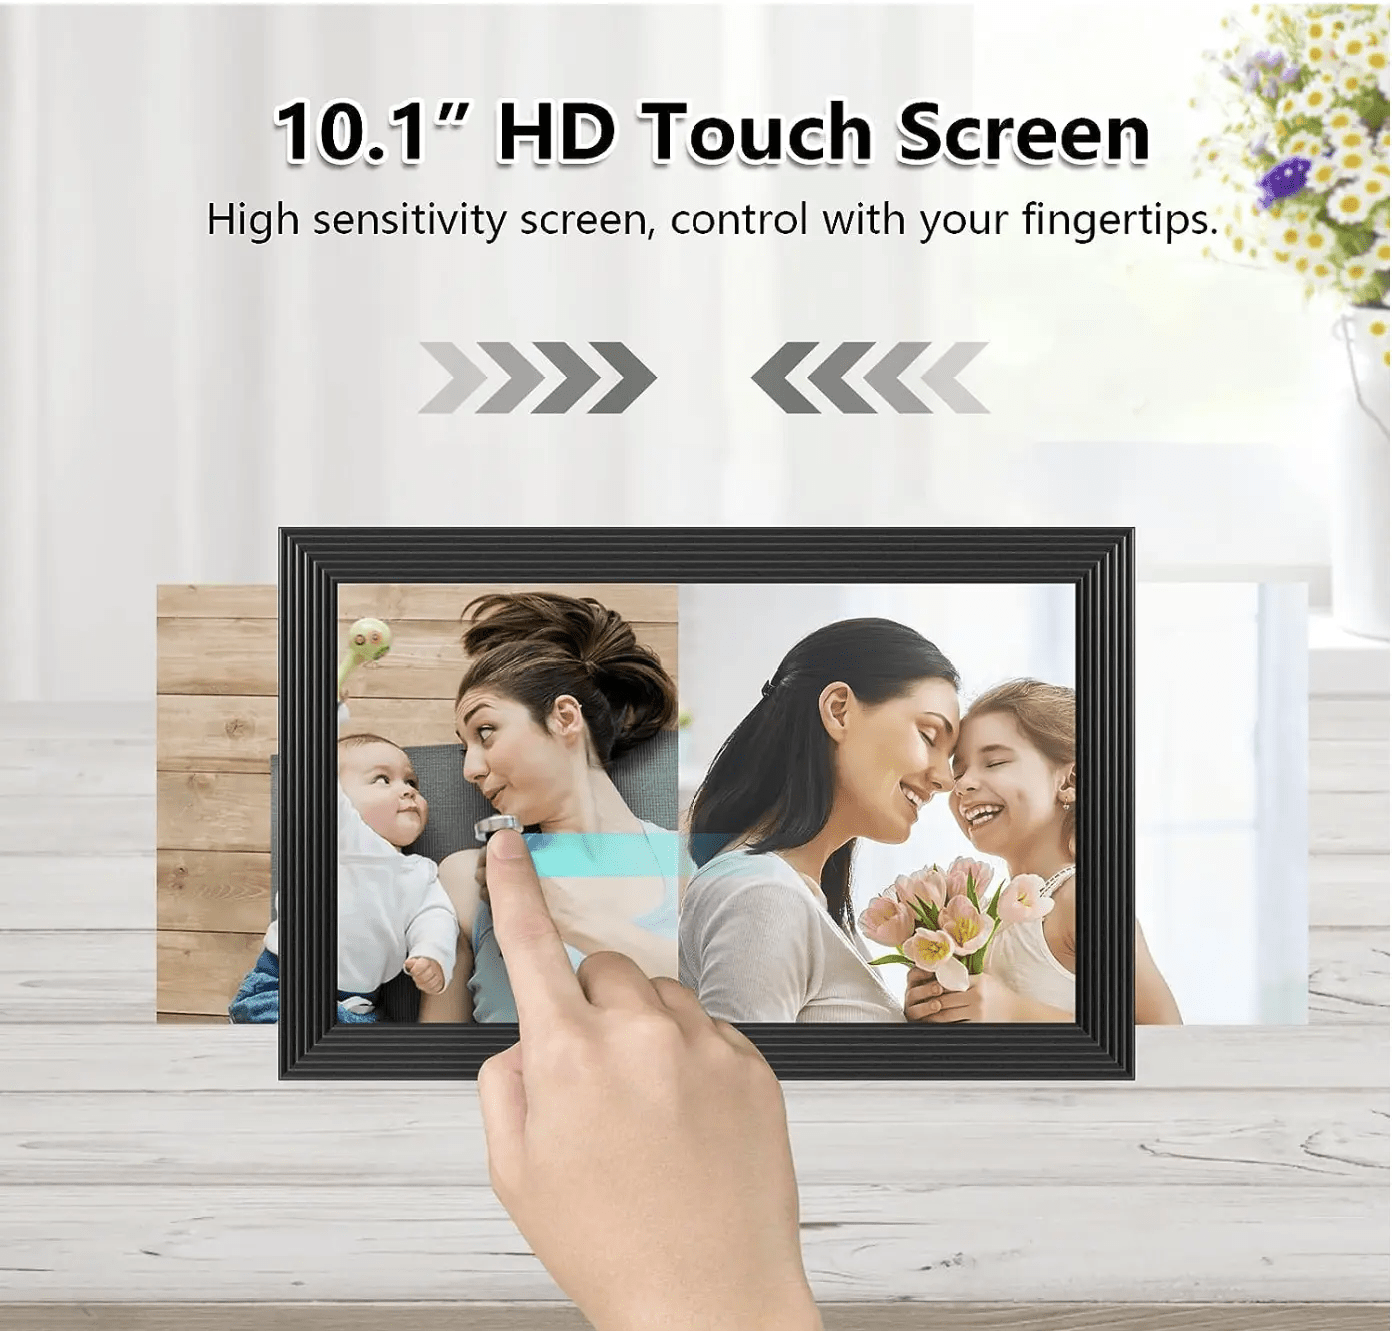 UK Technology Black Digital Photo Frame with a finger doing a swiping motion demonstrating the high sensitivity screen.